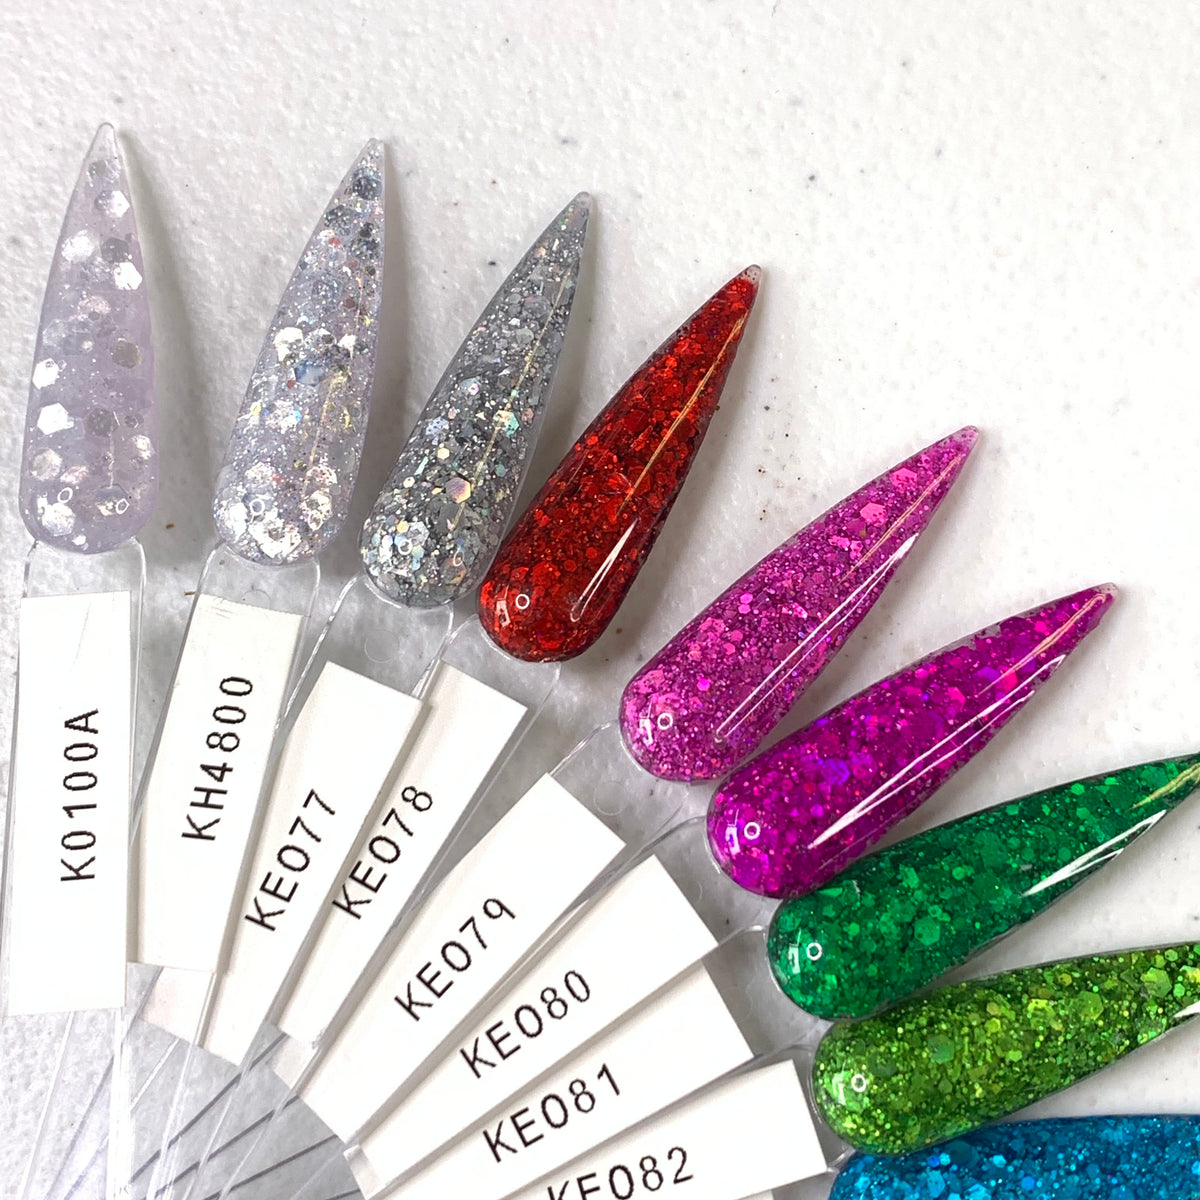 Fall Glitters Colors Acrylic Collection Part 2 - Mix sizes glitter